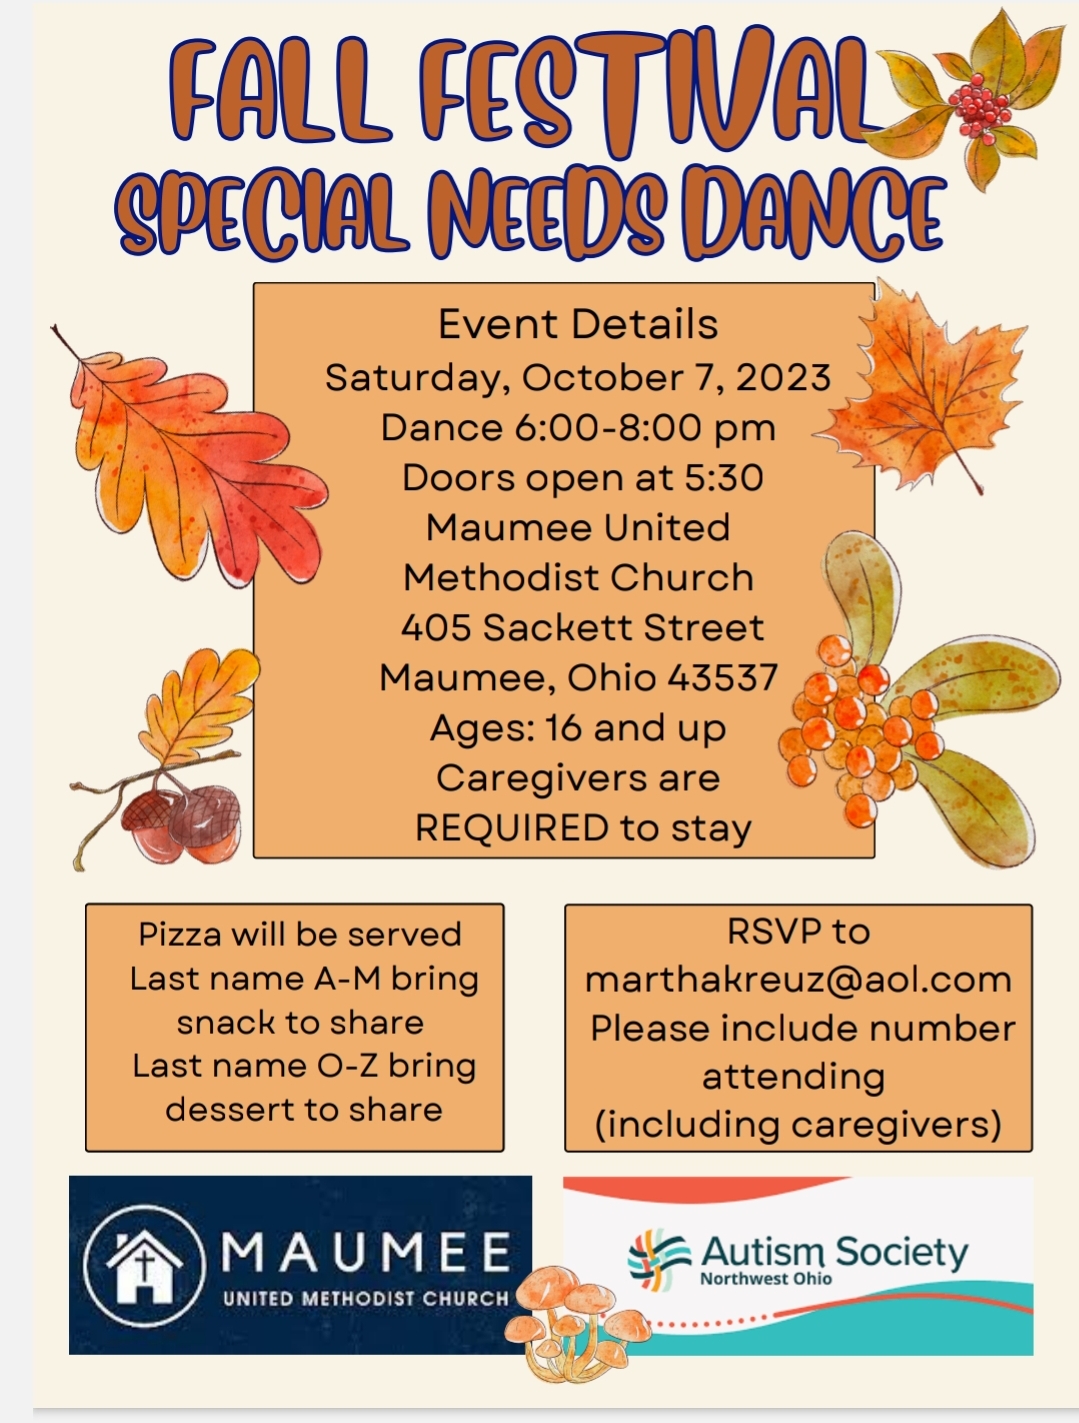 Fall Festival Special Needs Dance flyer